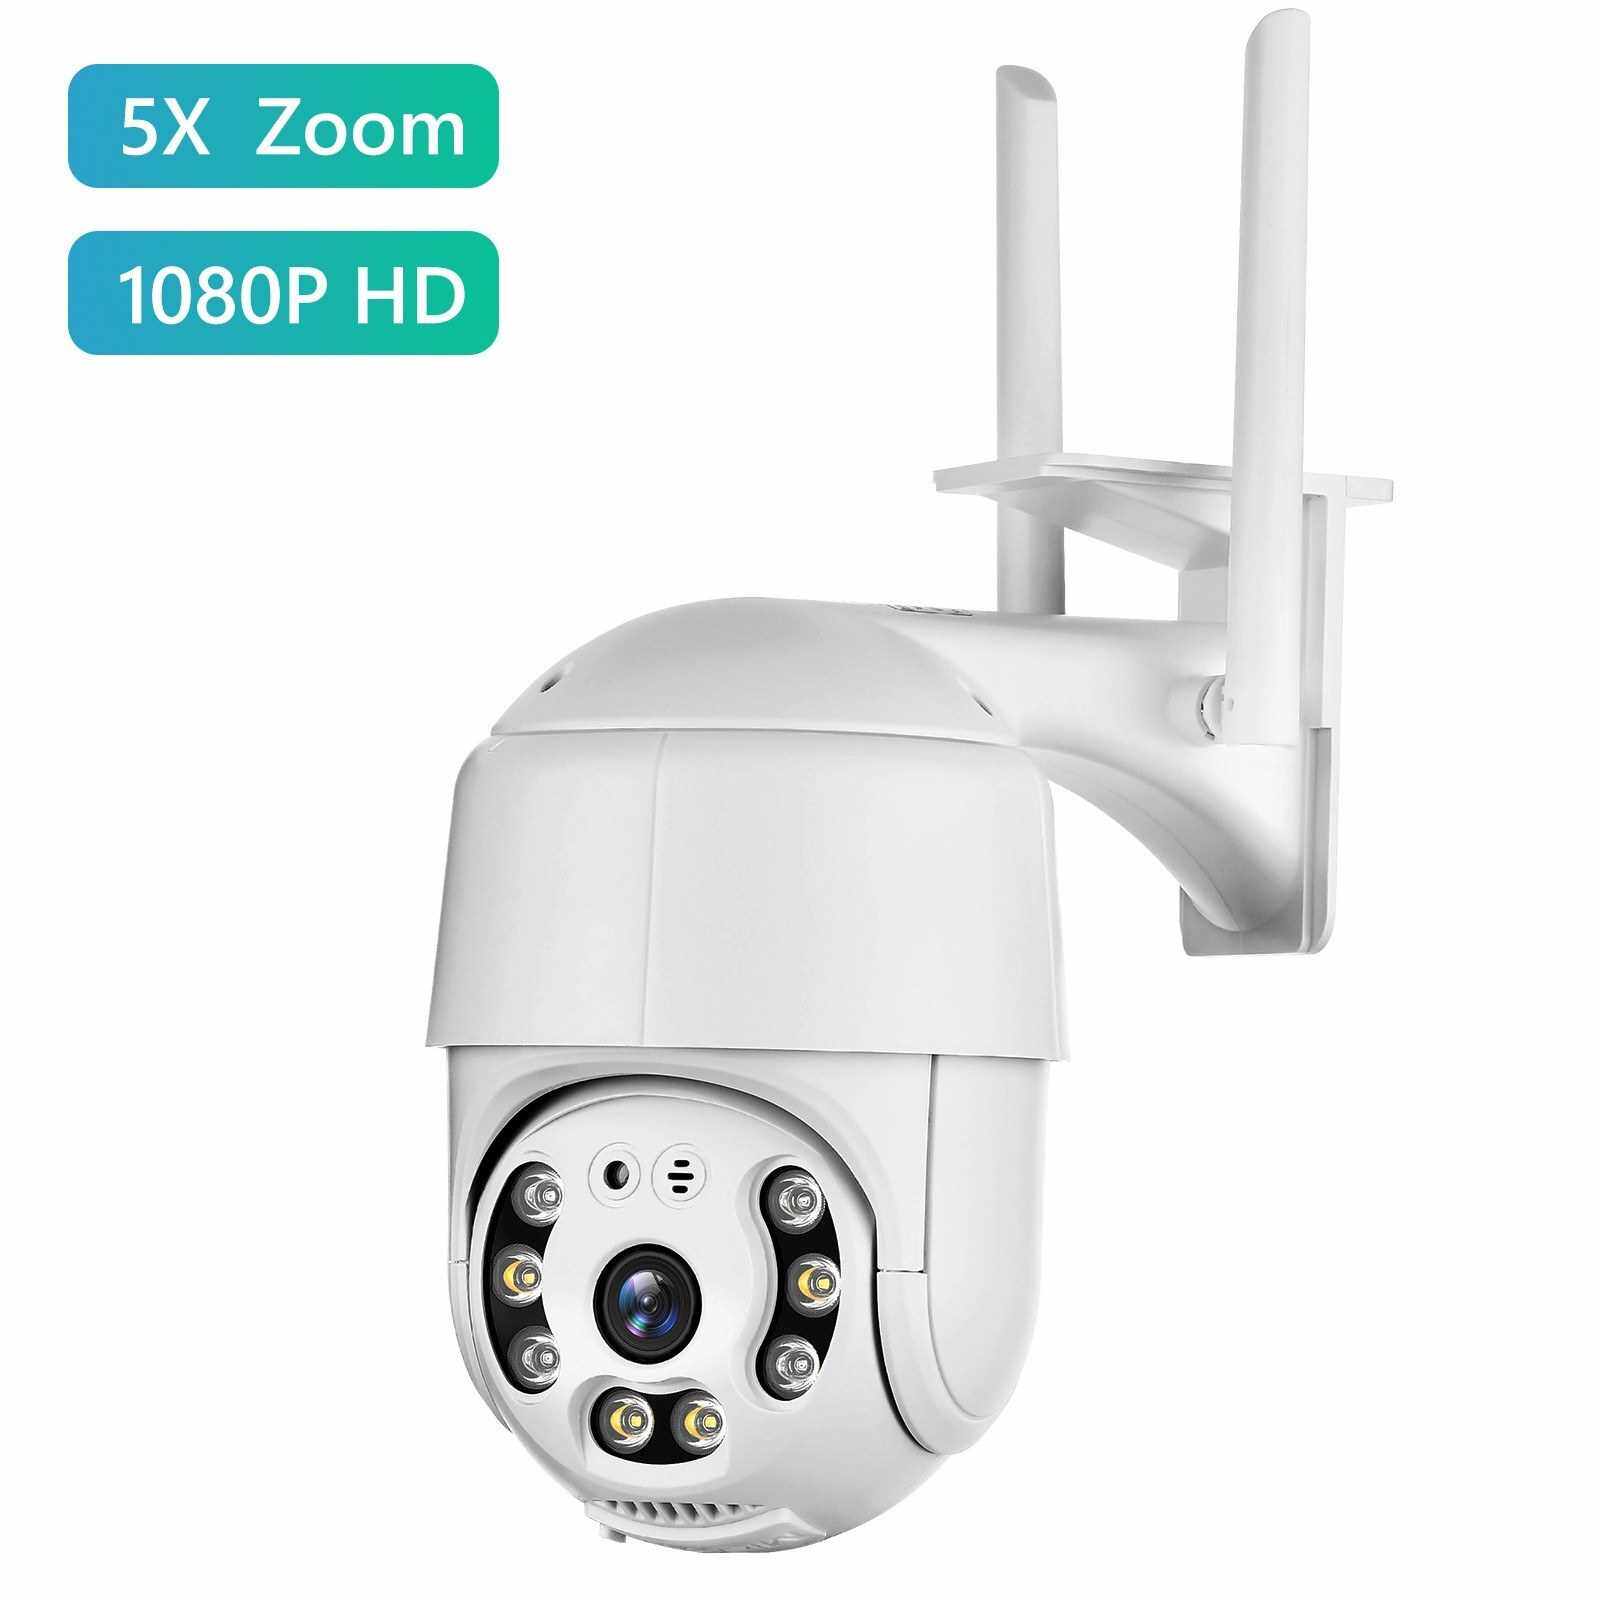 Outdoor PTZ Security Camera, 1080P Home Surveillance Camera with Pan/Tilt, Color Night Vision, 2-Way Audio, Motion Detection, IP66 Weatherproof (White)